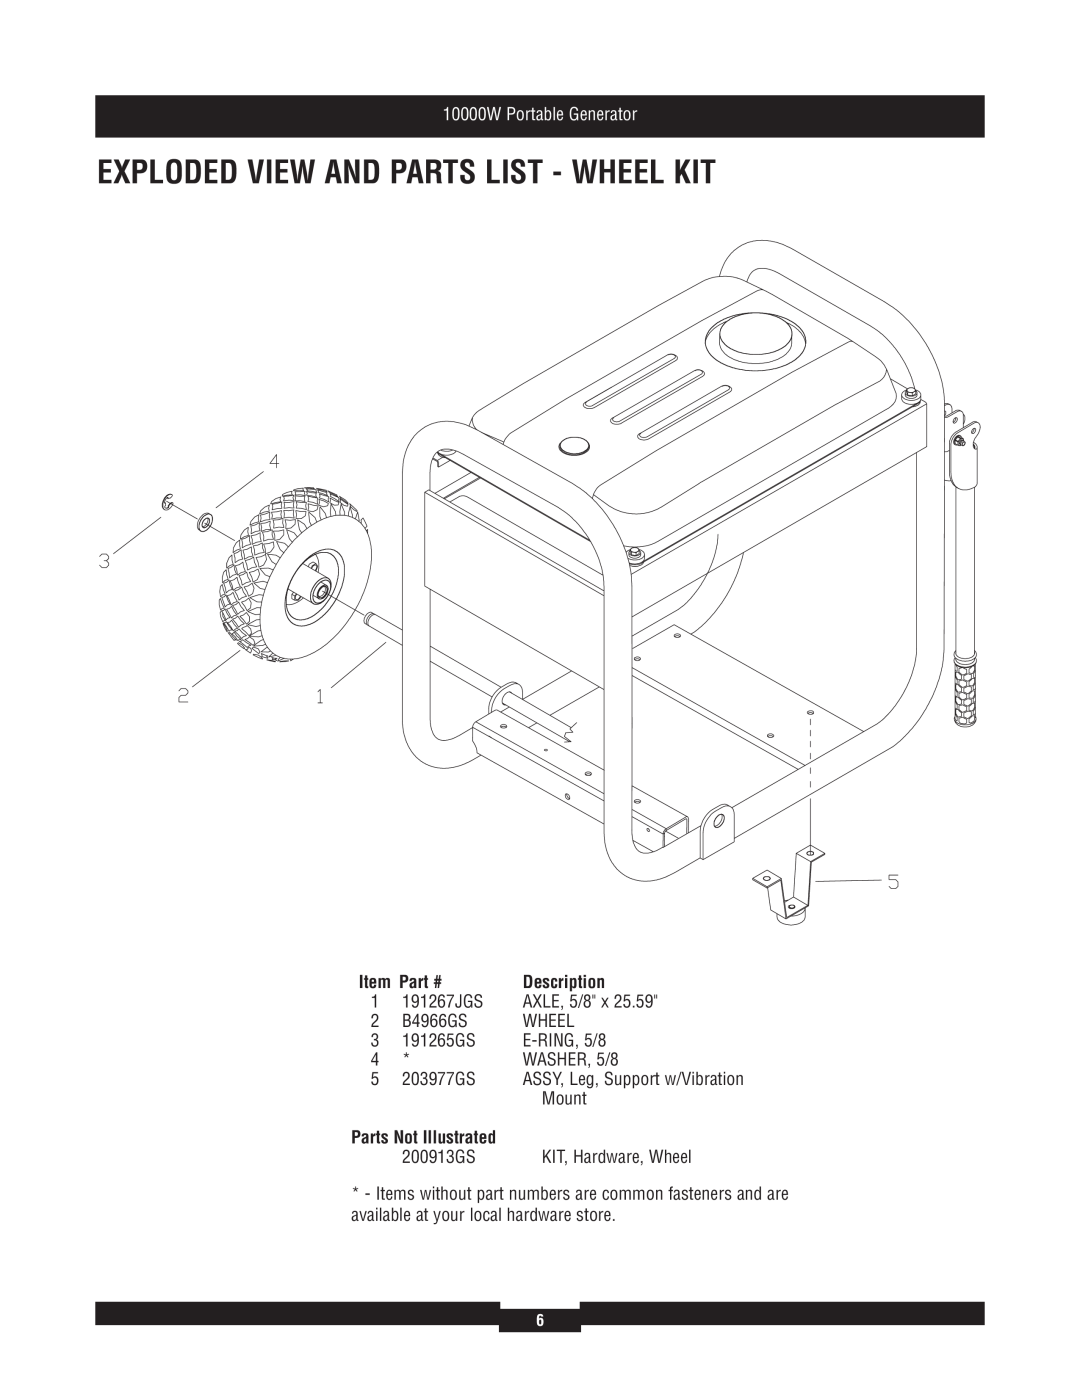 Briggs & Stratton 30207 manual Exploded View And Parts List - Wheel Kit, Parts Not Illustrated, 10000W Portable Generator 